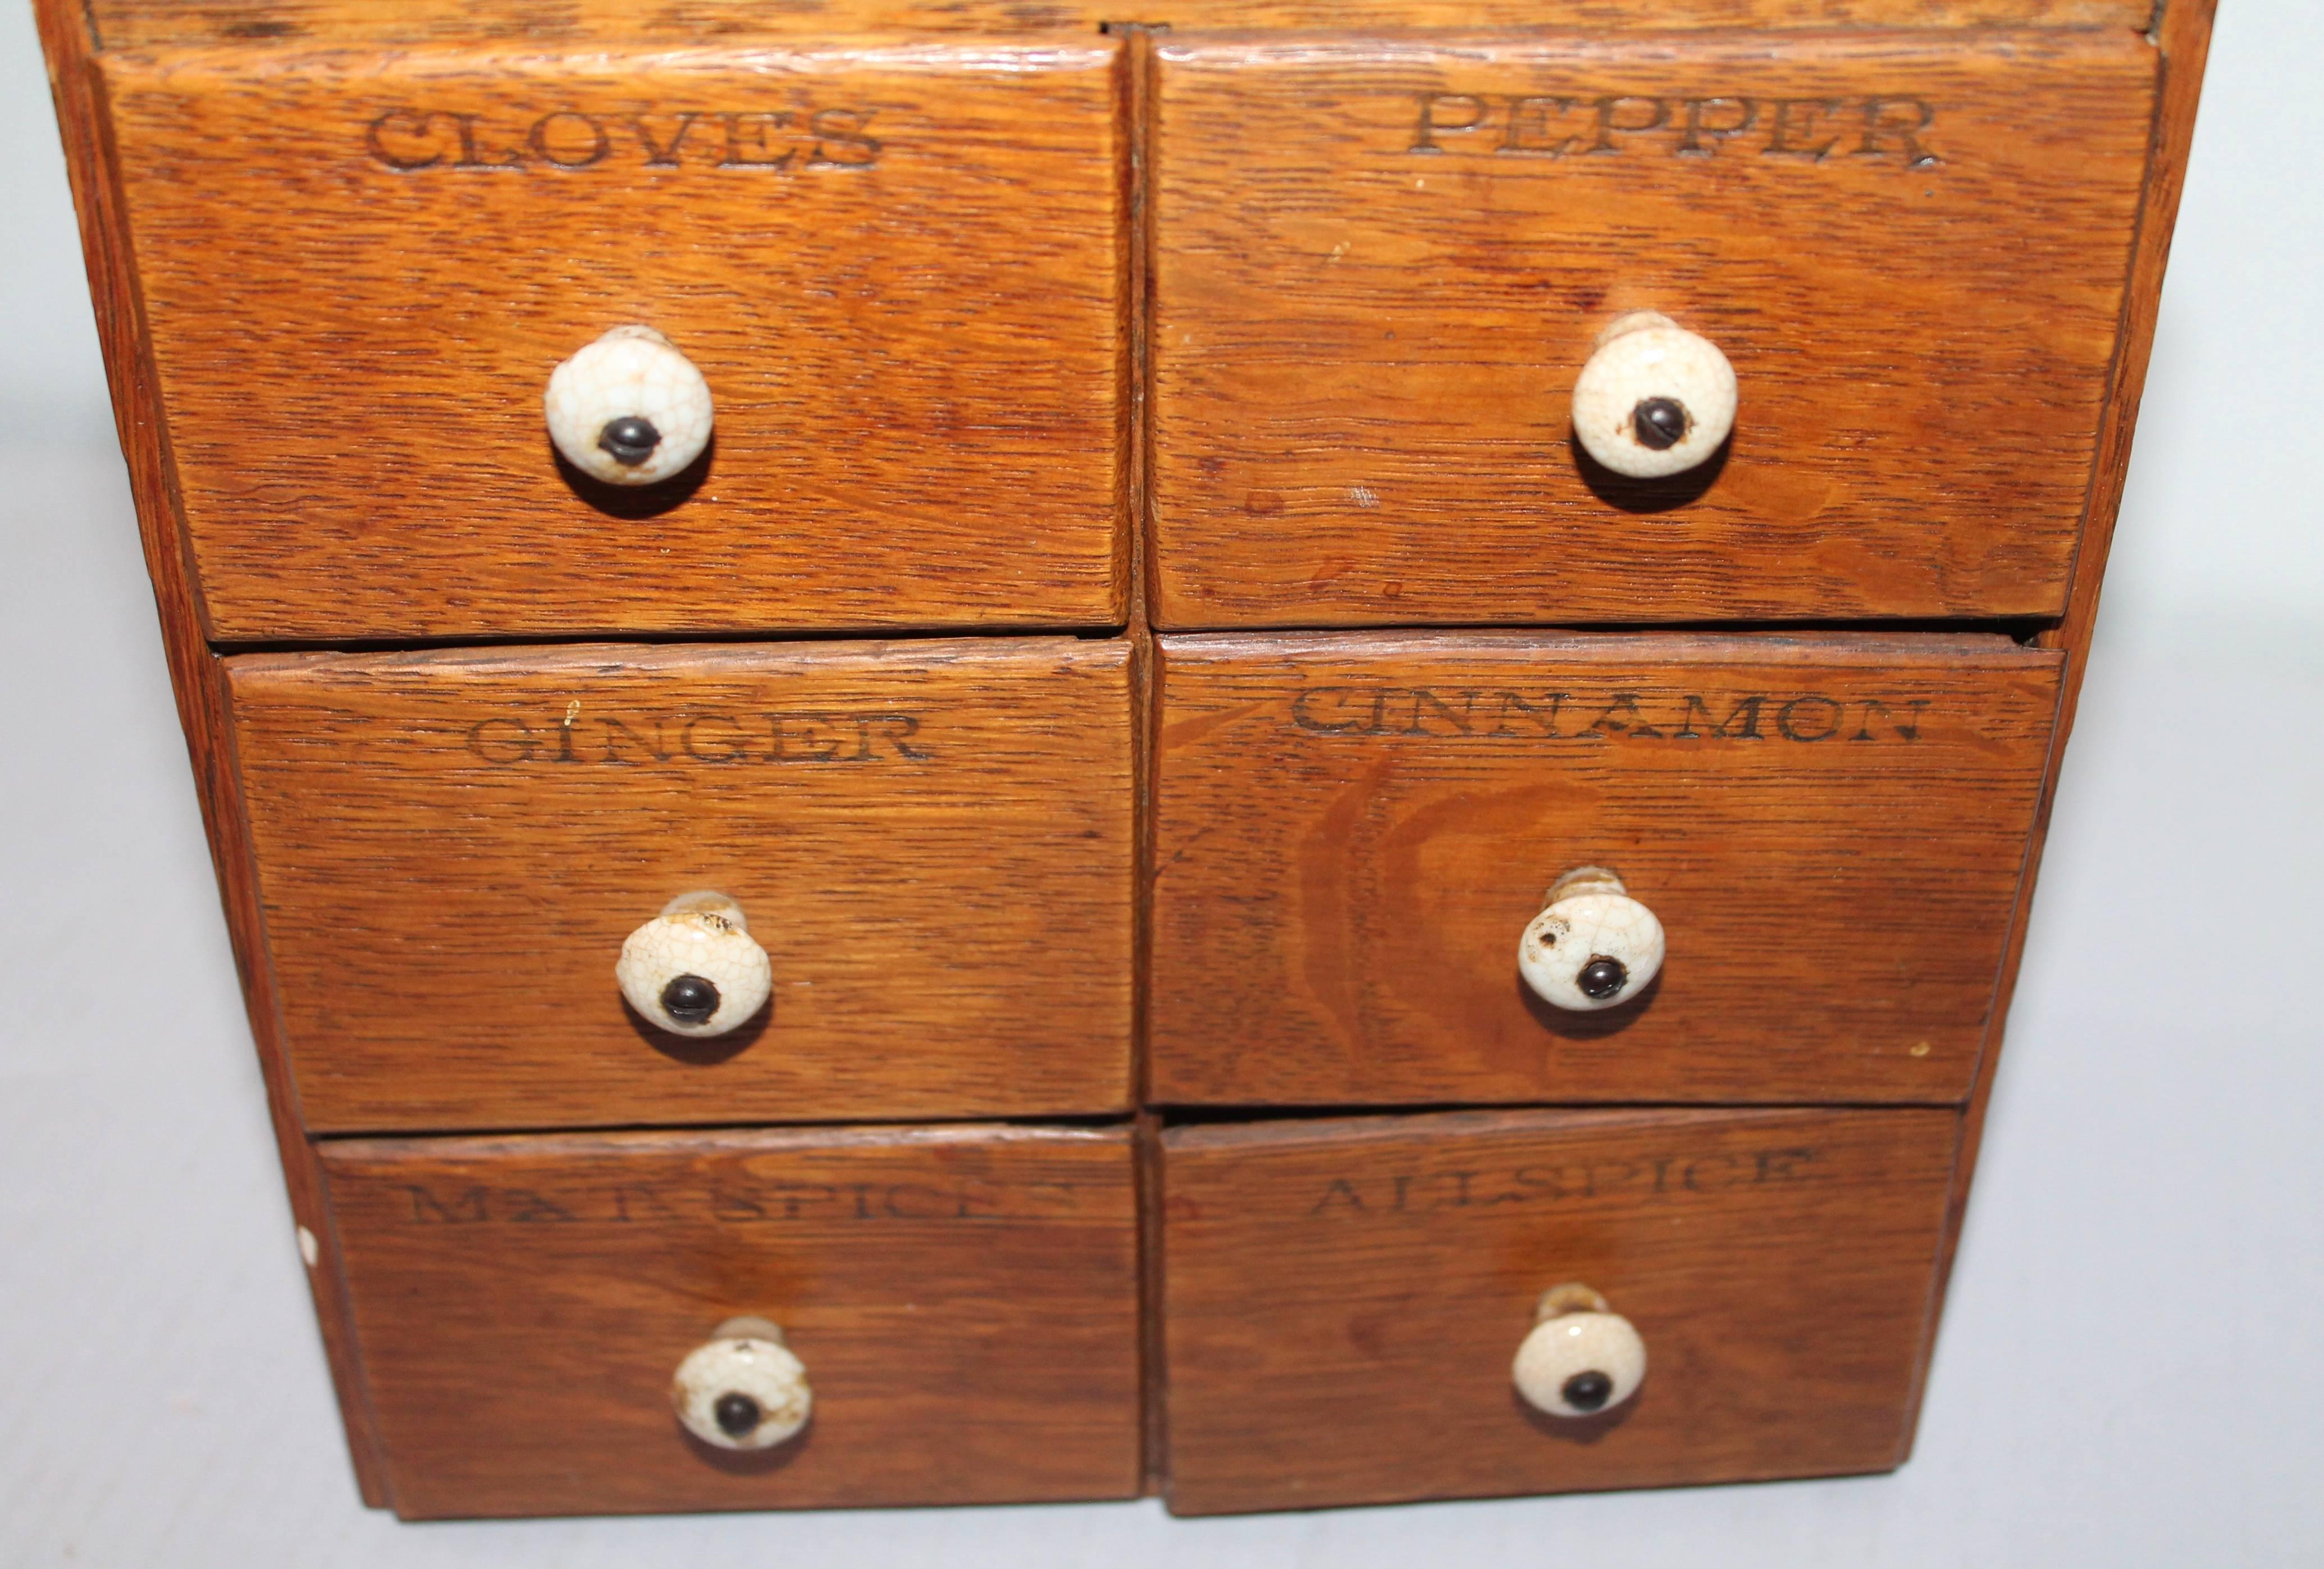 This 19th century oak counter or hanging apothecary spice box is in fine as found condition. The wear is consistent with age and use. The drawers are marked cloves, pepper, ginger, cinnamon, all spice, mxt spices. The porcelain knobs on the drawers